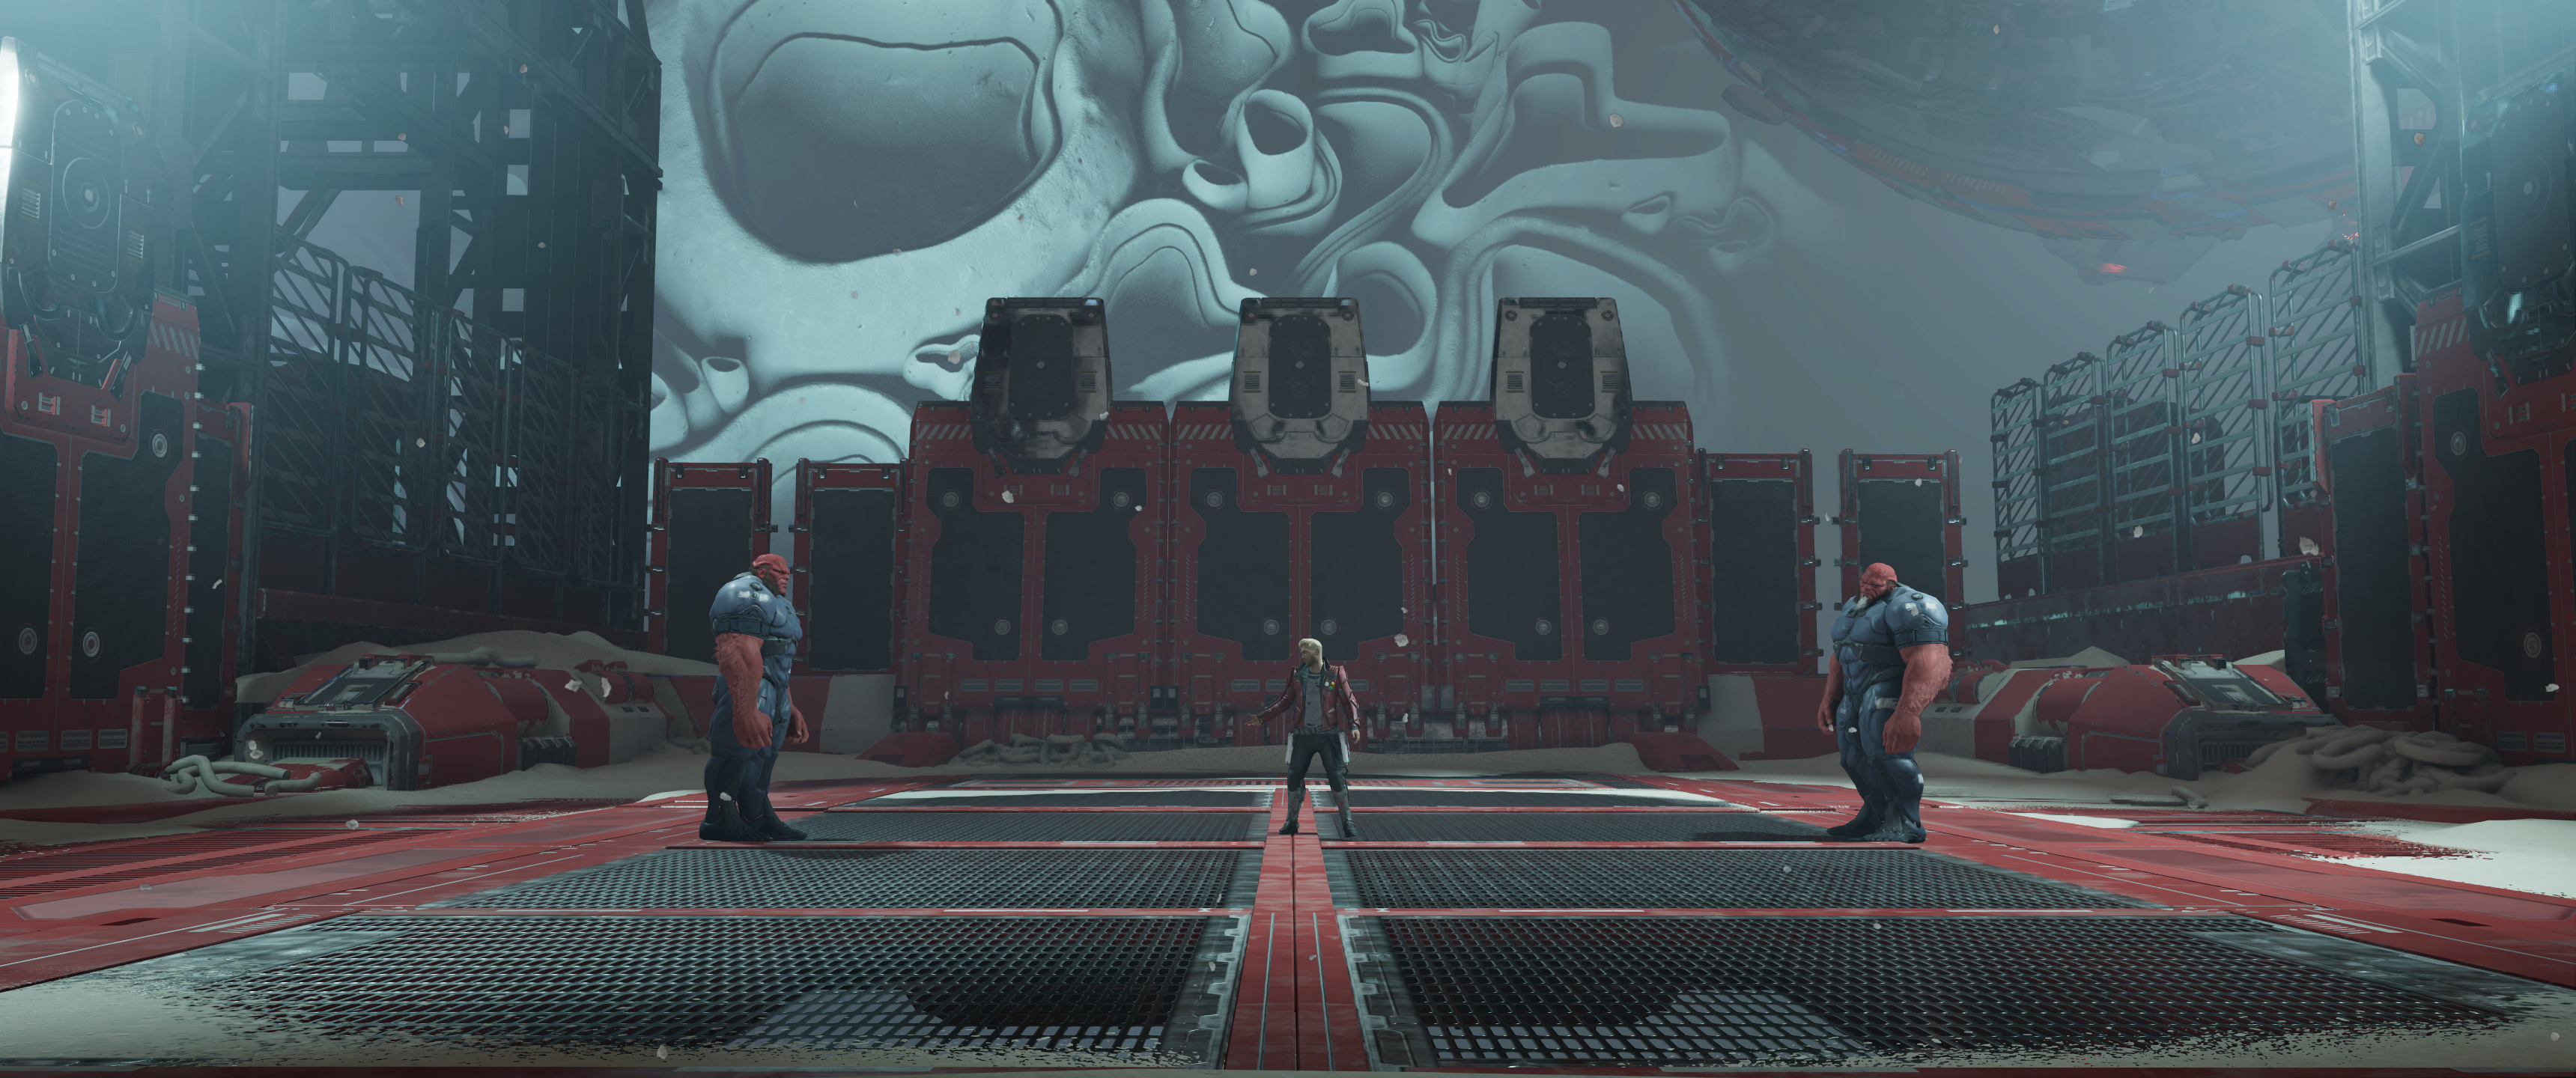 Guardians Of The Galaxy Game Aliens Video Games 3440x1440